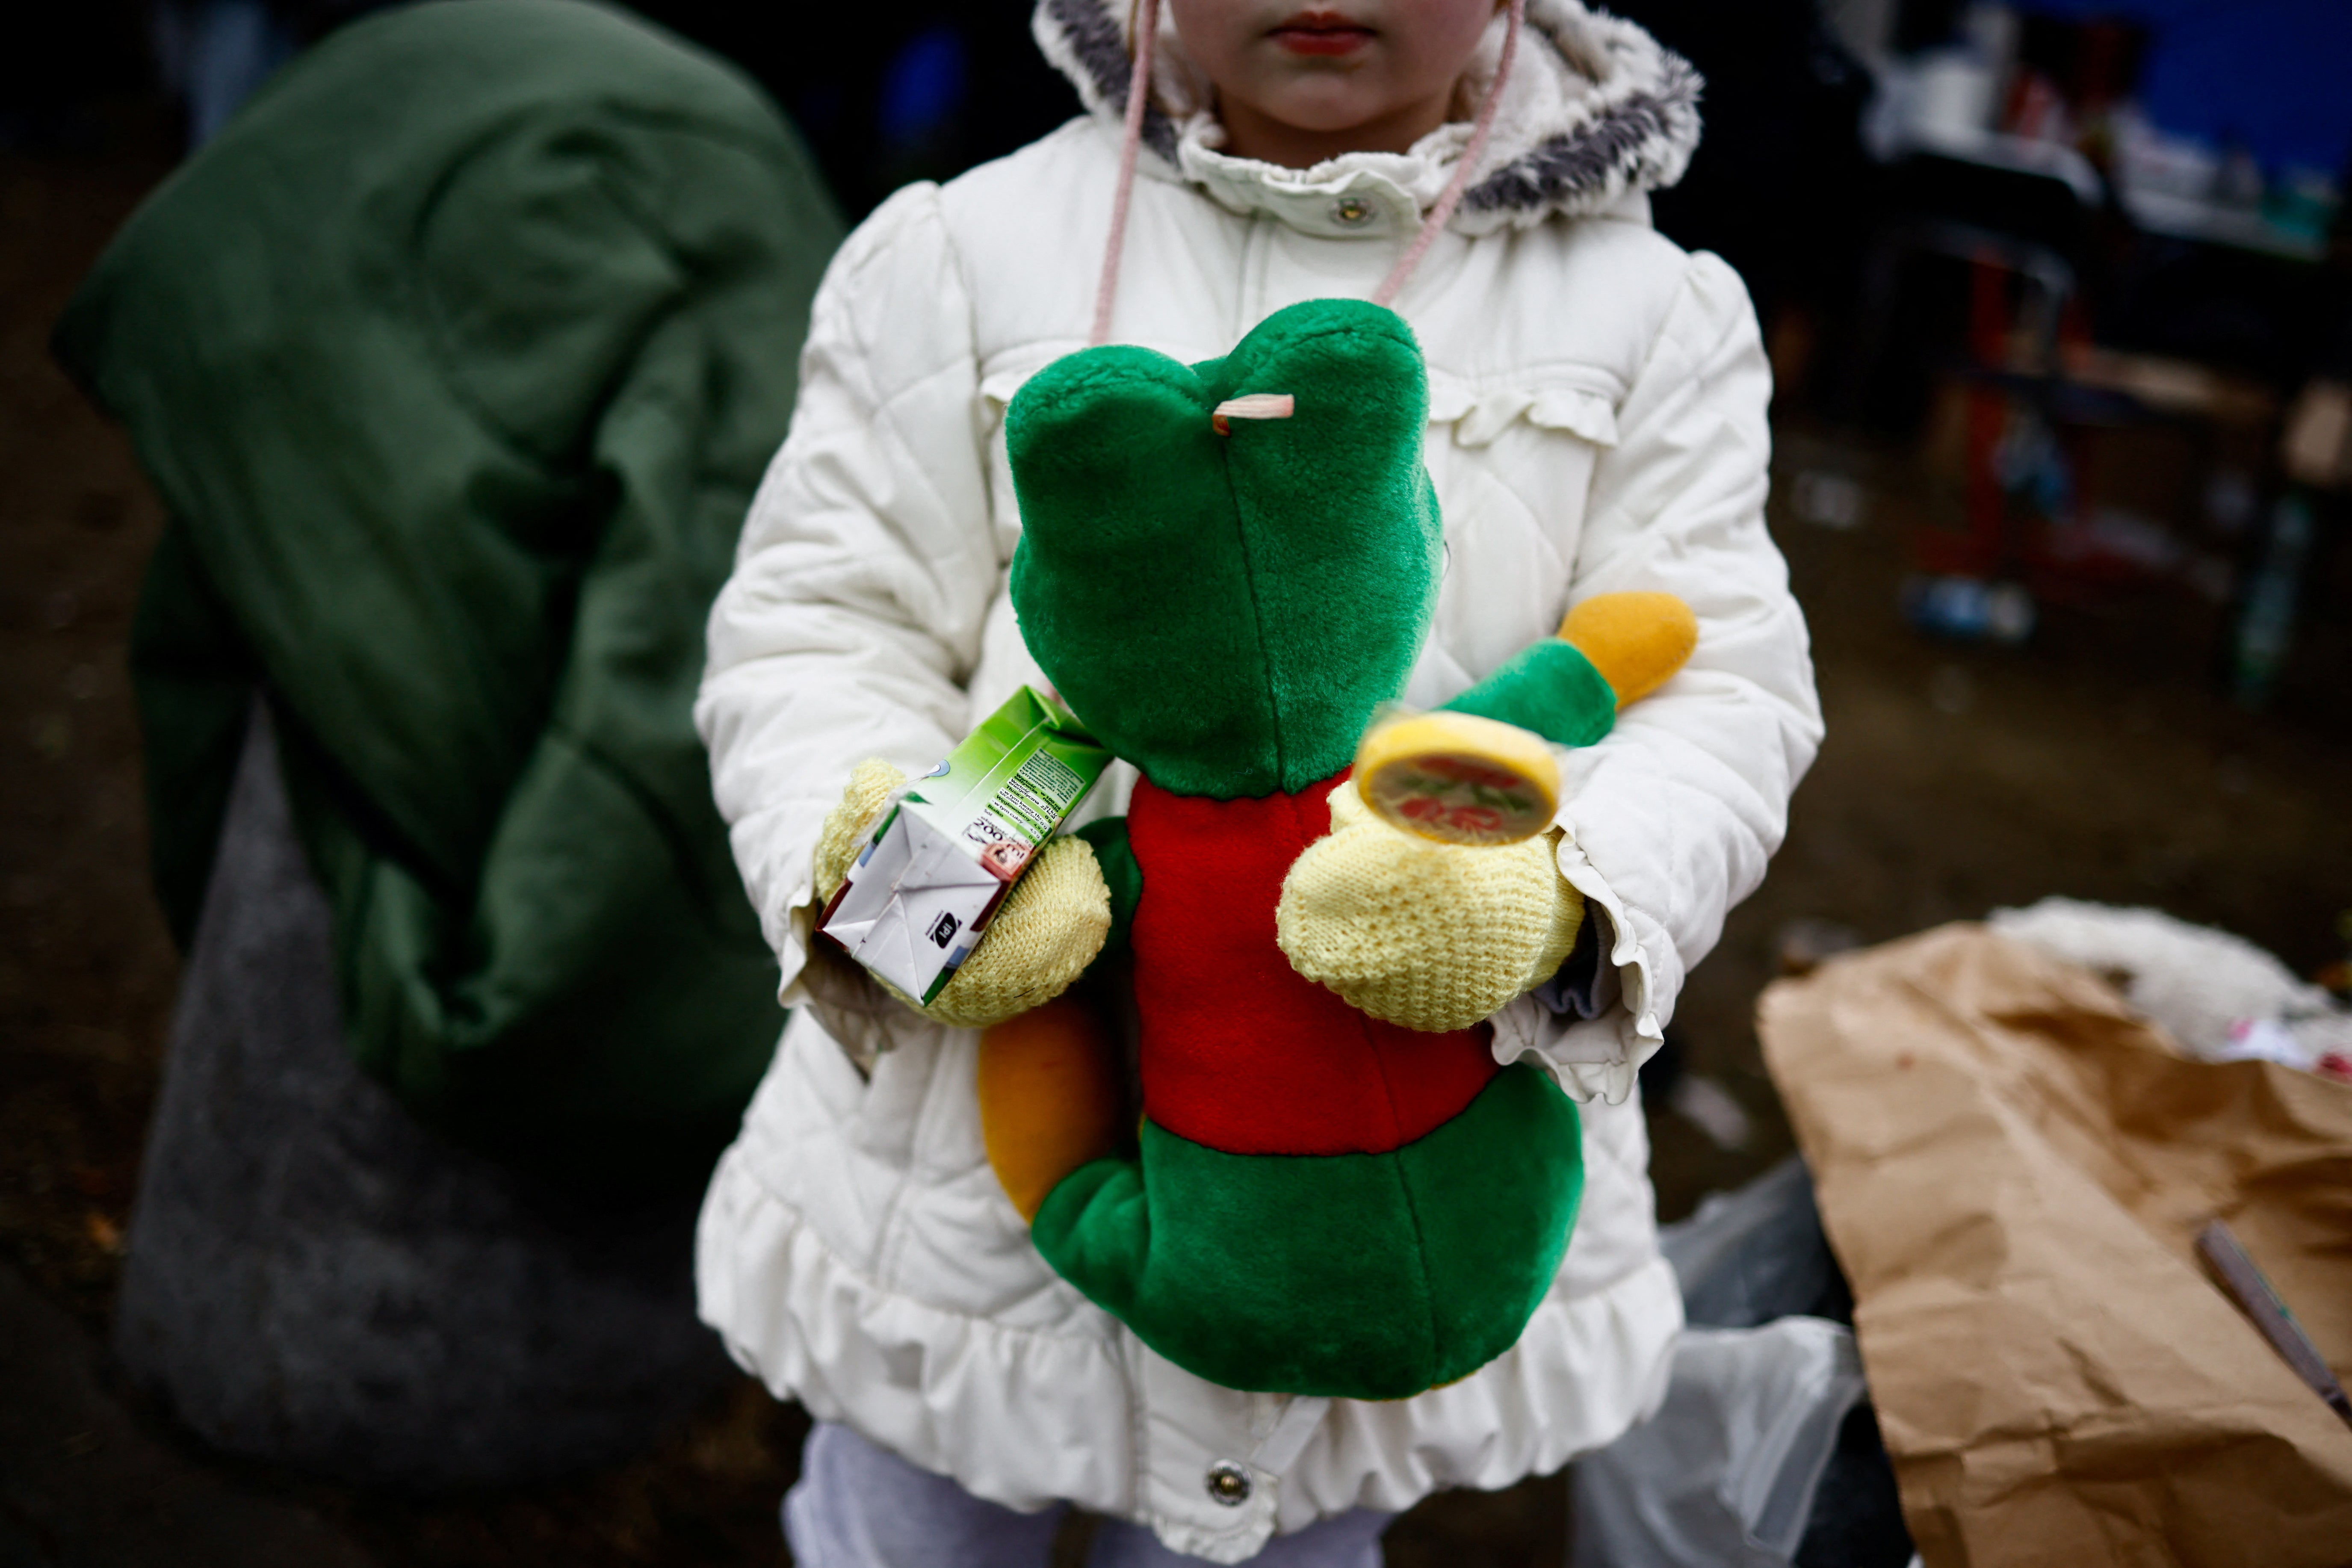 A child fleeing Russian invasion of Ukraine holds a toy at a temporary camp in Przemysl, Poland